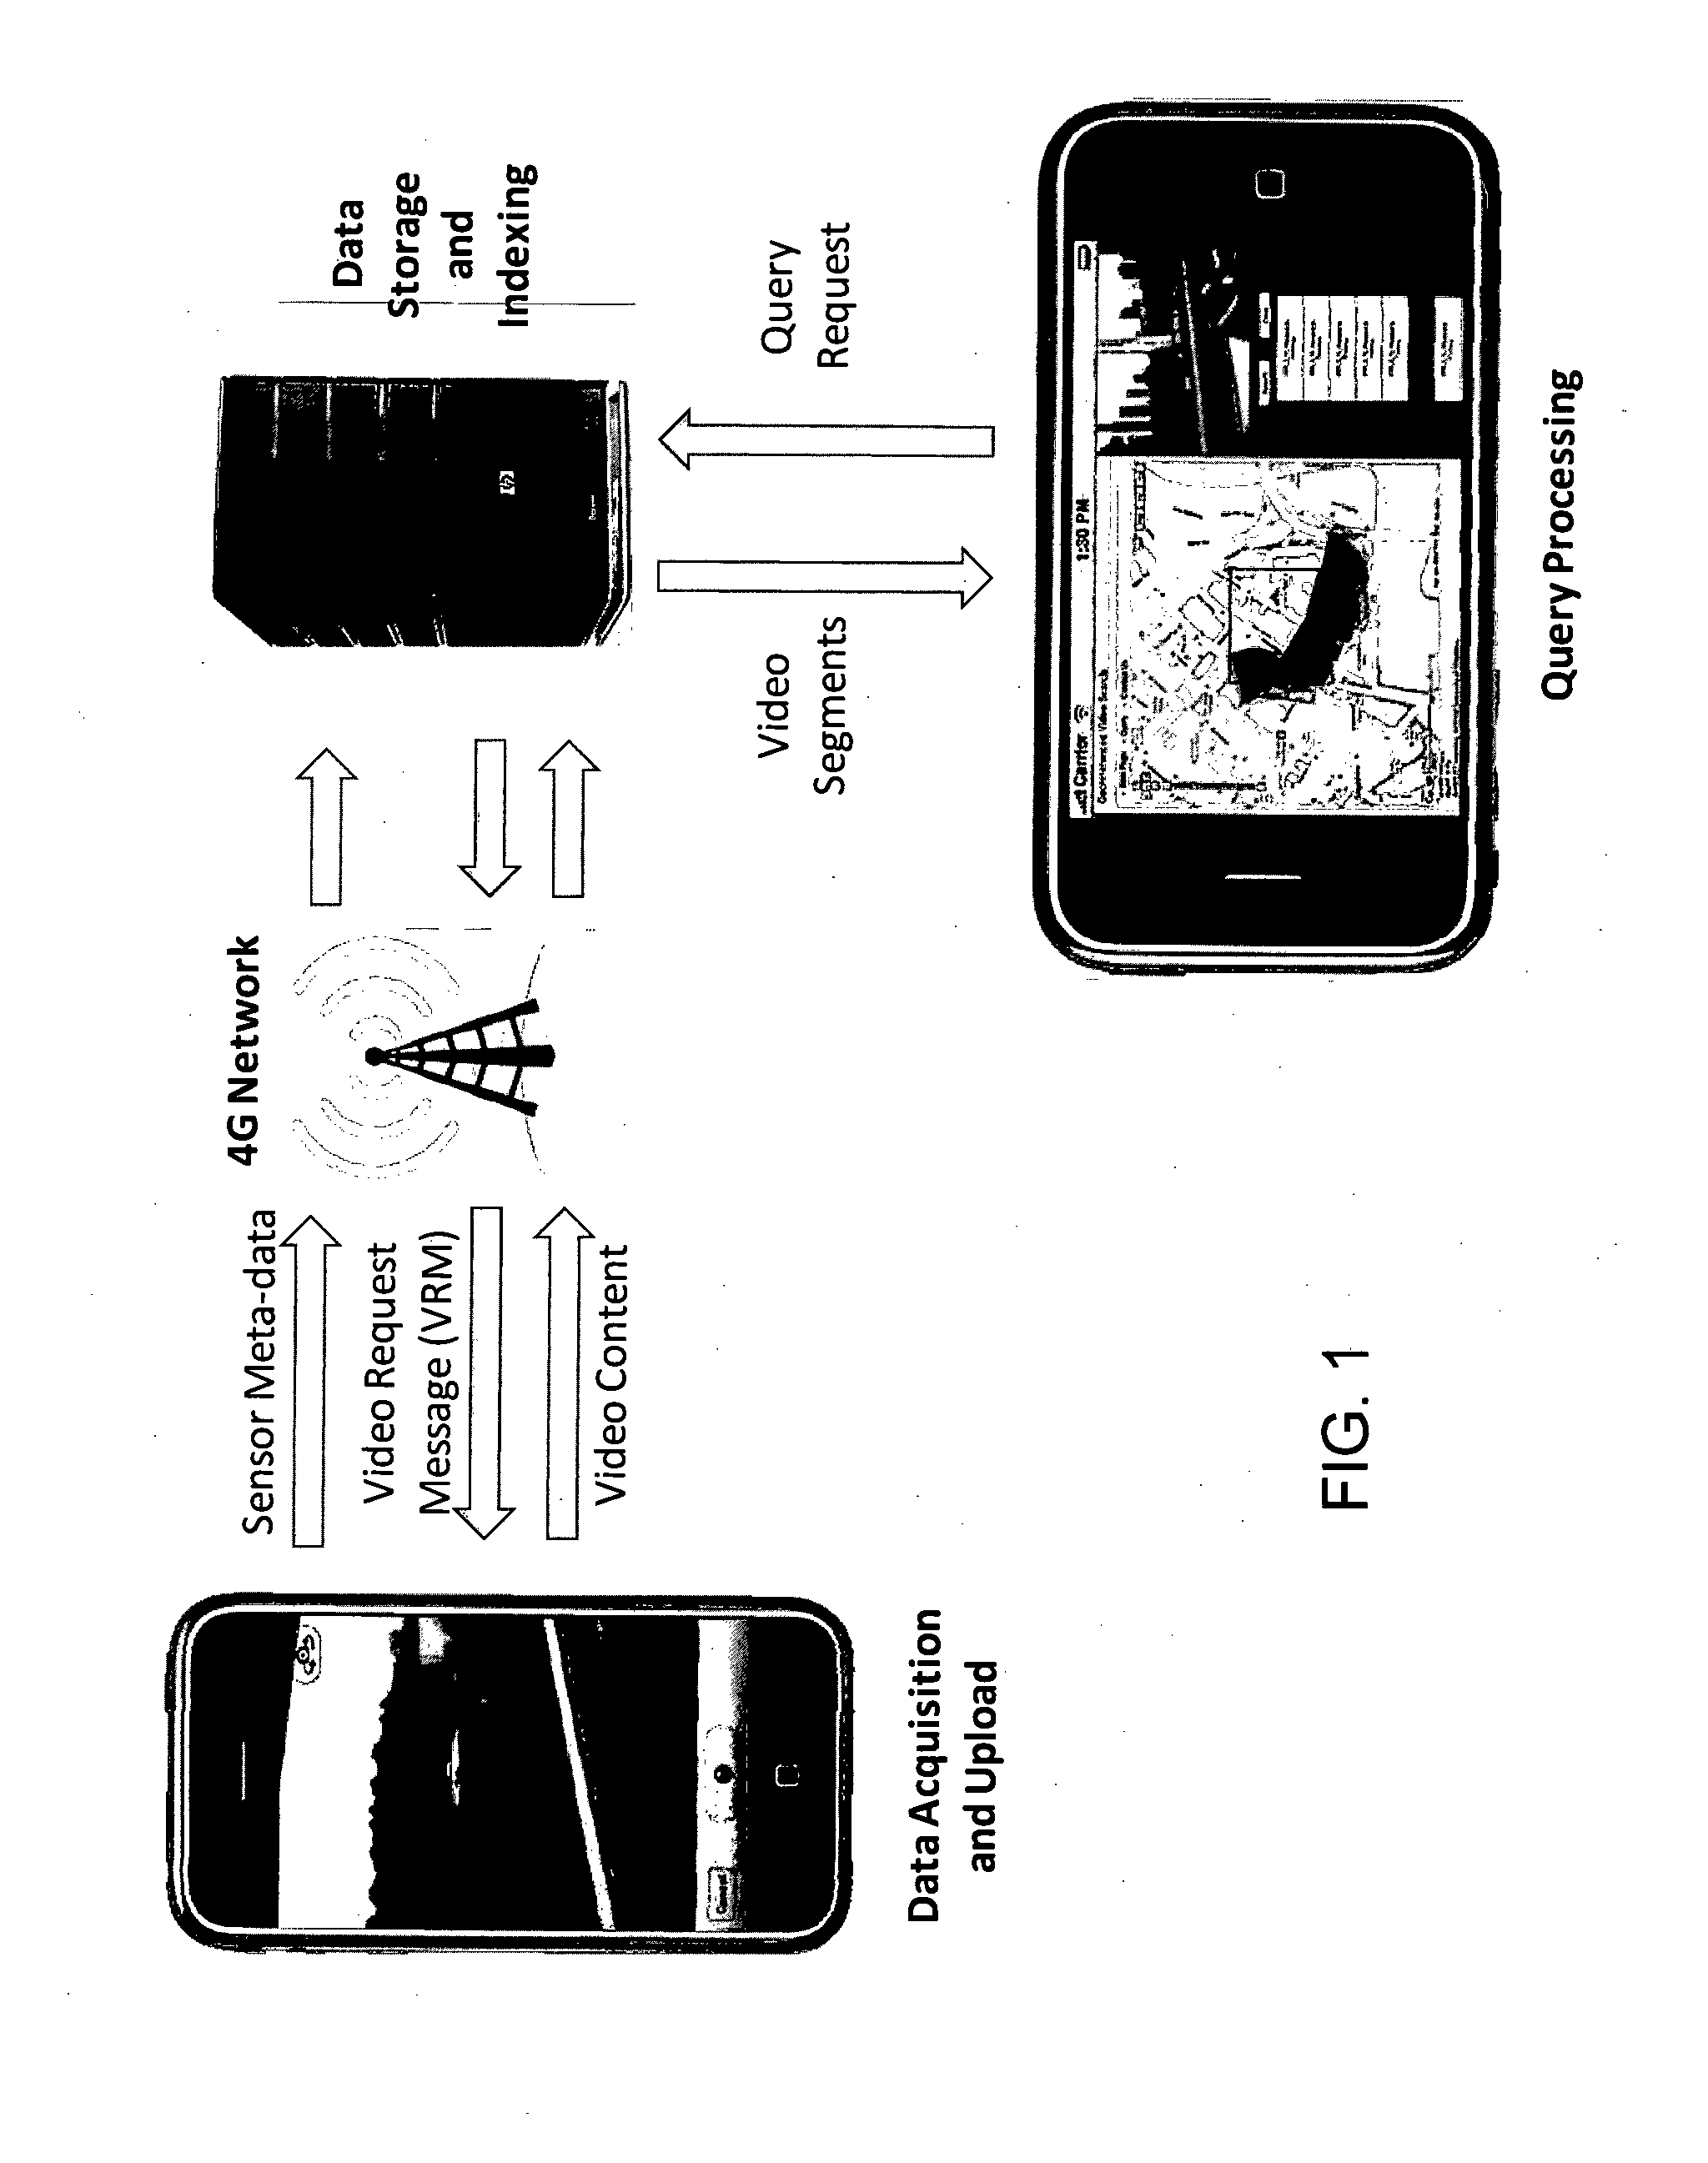 Apparatus, System, and Method for Annotation of Media Files with Sensor Data